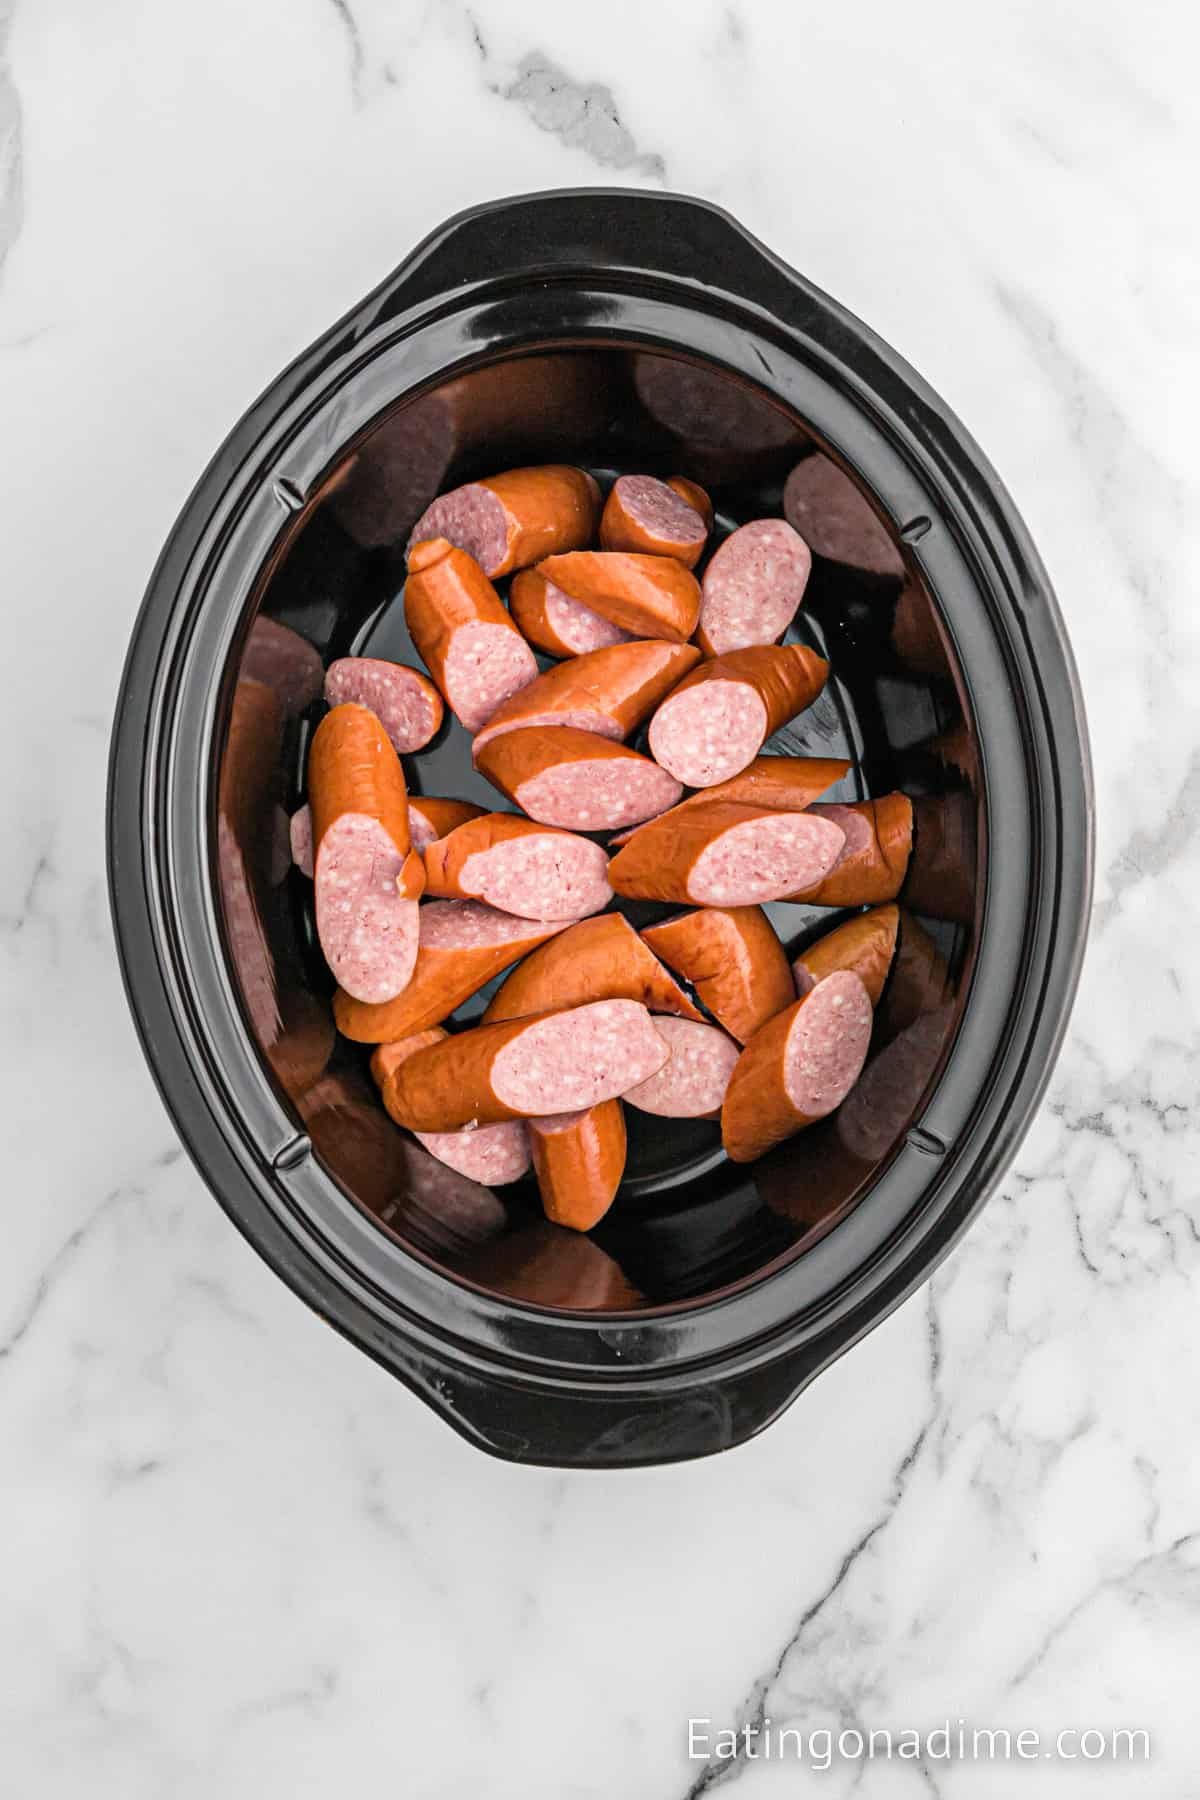 A black slow cooker on a marble surface contains sliced sausages with visible pink interiors, perfect for making Slow Cooker Kielbasa and Sauerkraut. The text "Eatingonadime.com" is visible in the lower right corner of the image.